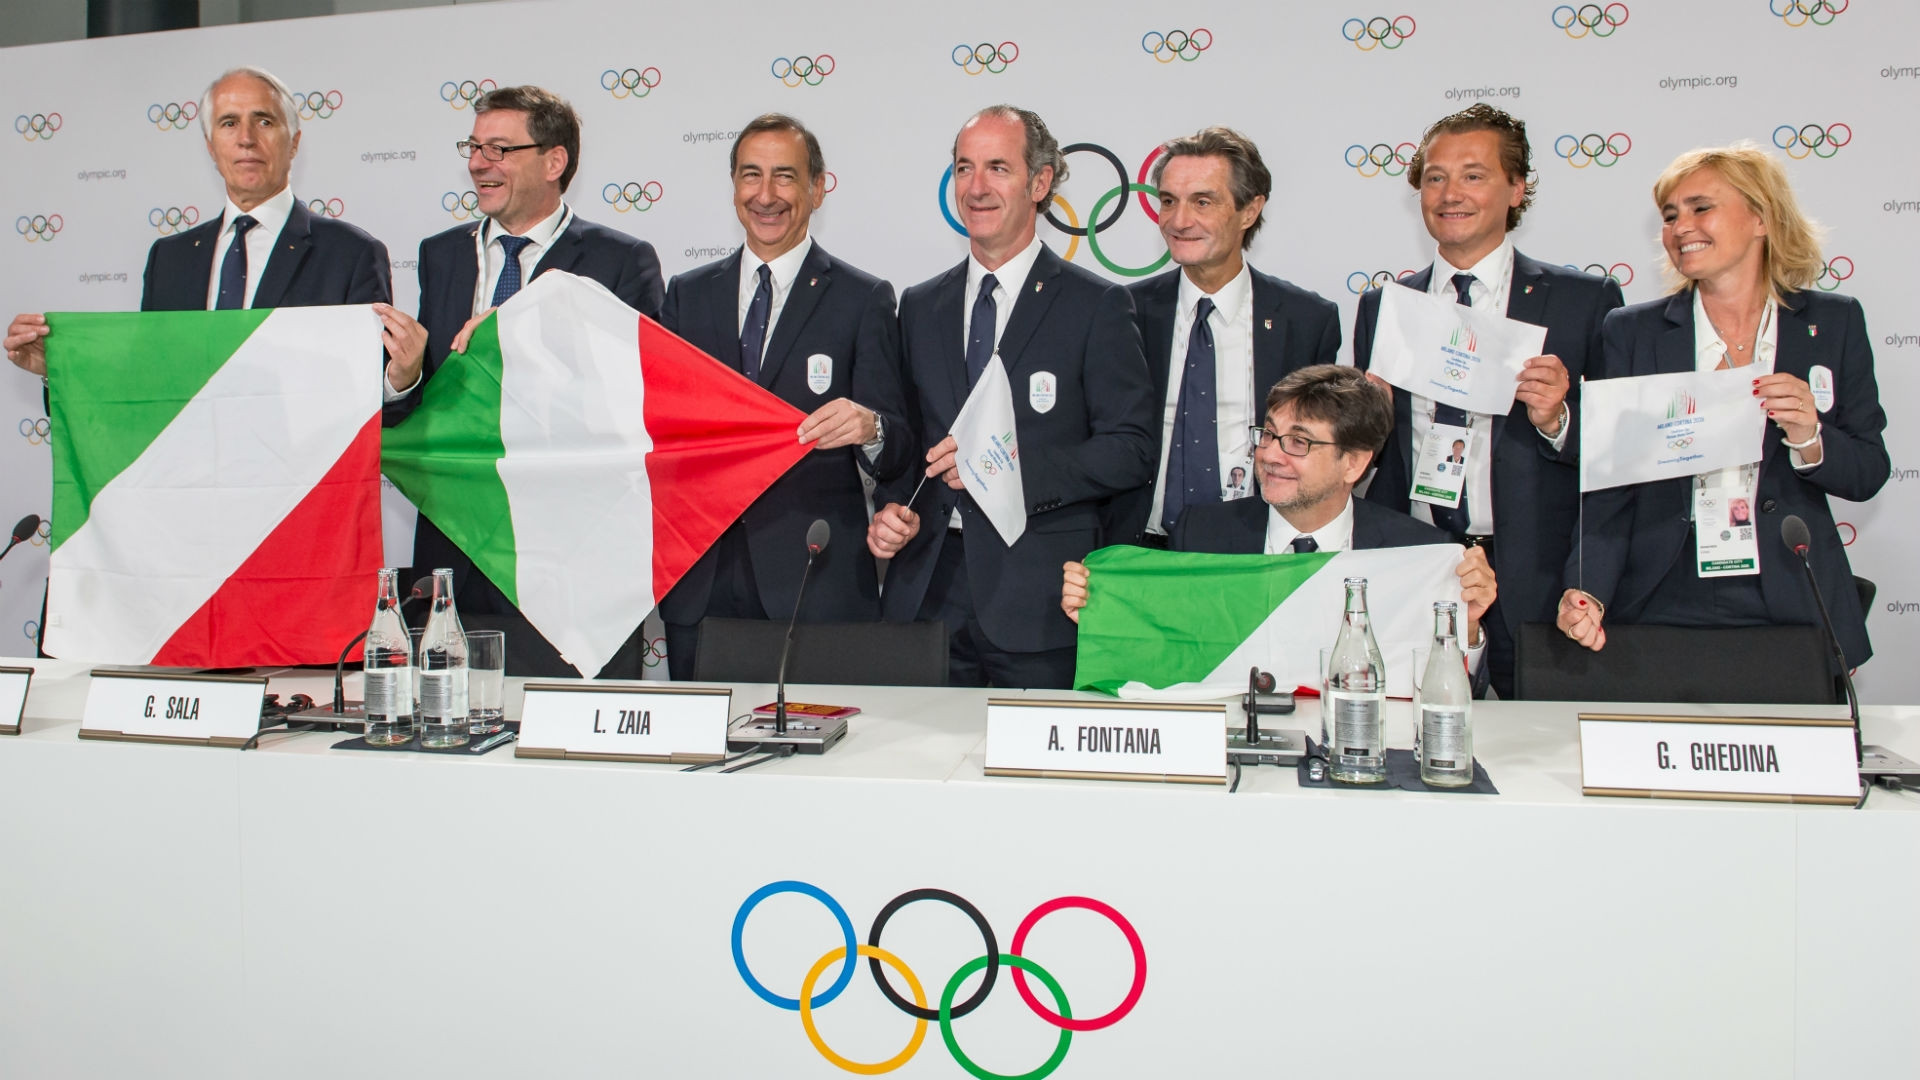 Milan and Cortina d'Ampezzo were awarded the 2026 Winter Olympics in June 2019 ©Getty Images